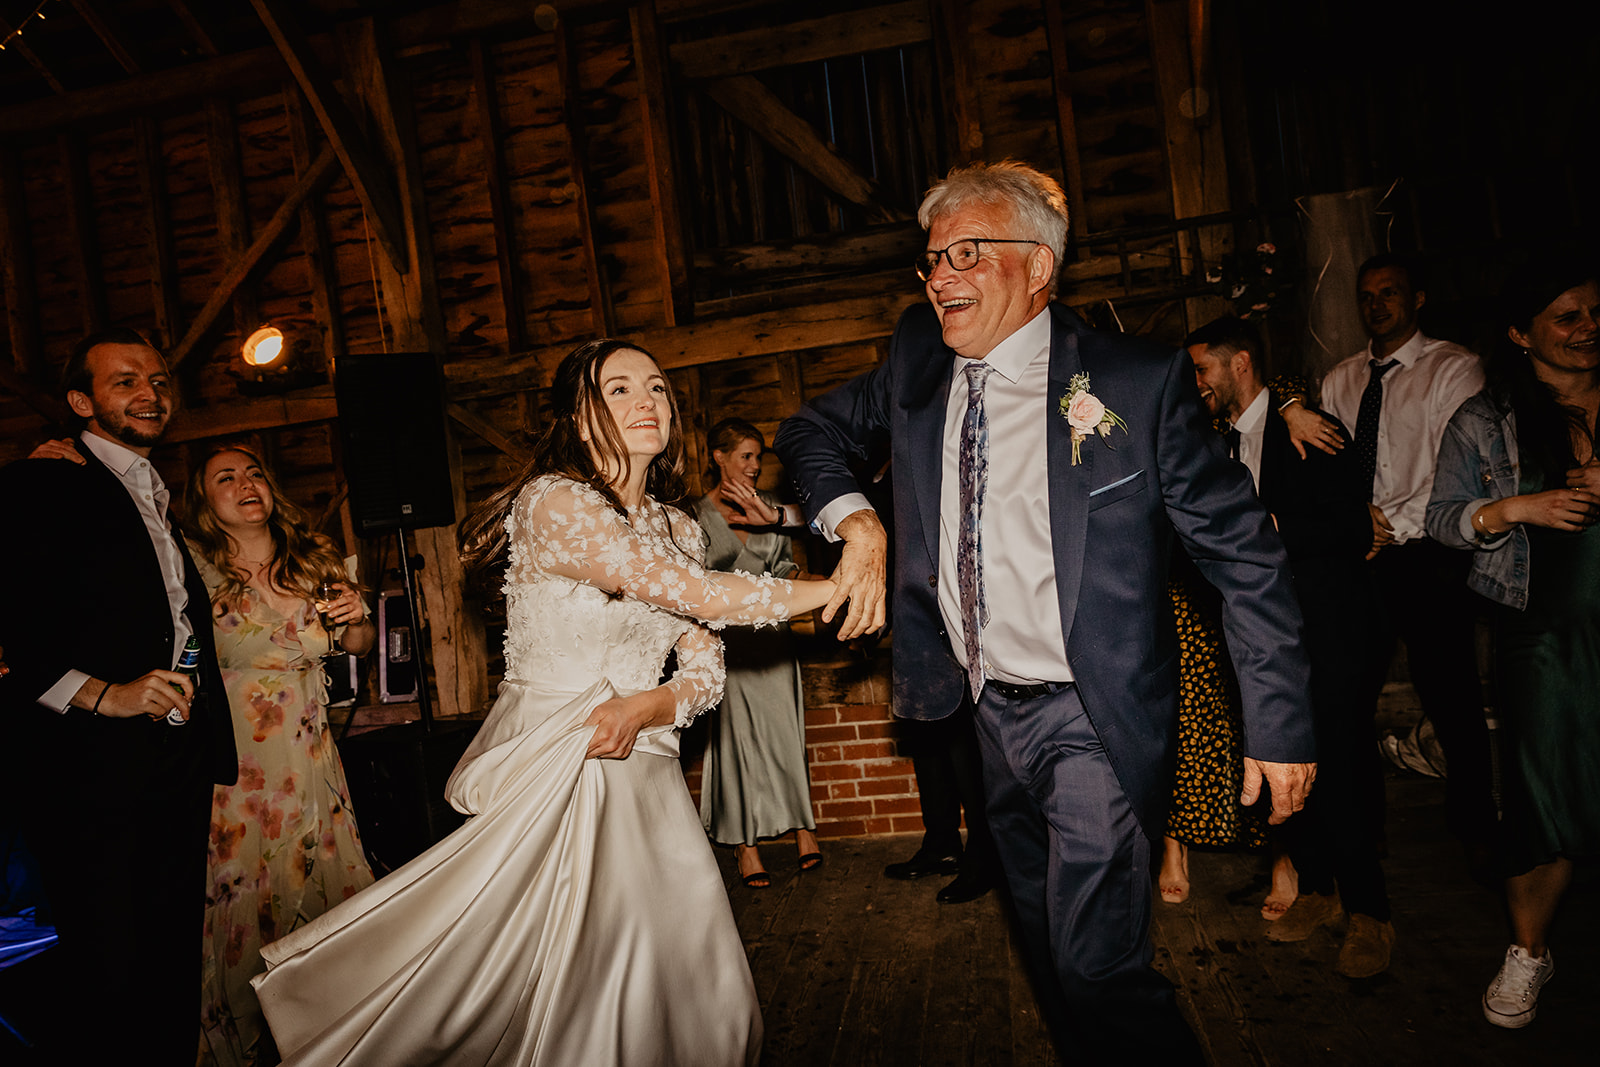 Bride and father first dance at a Secret Barn Wedding, West Sussex. By Olive Joy Photography